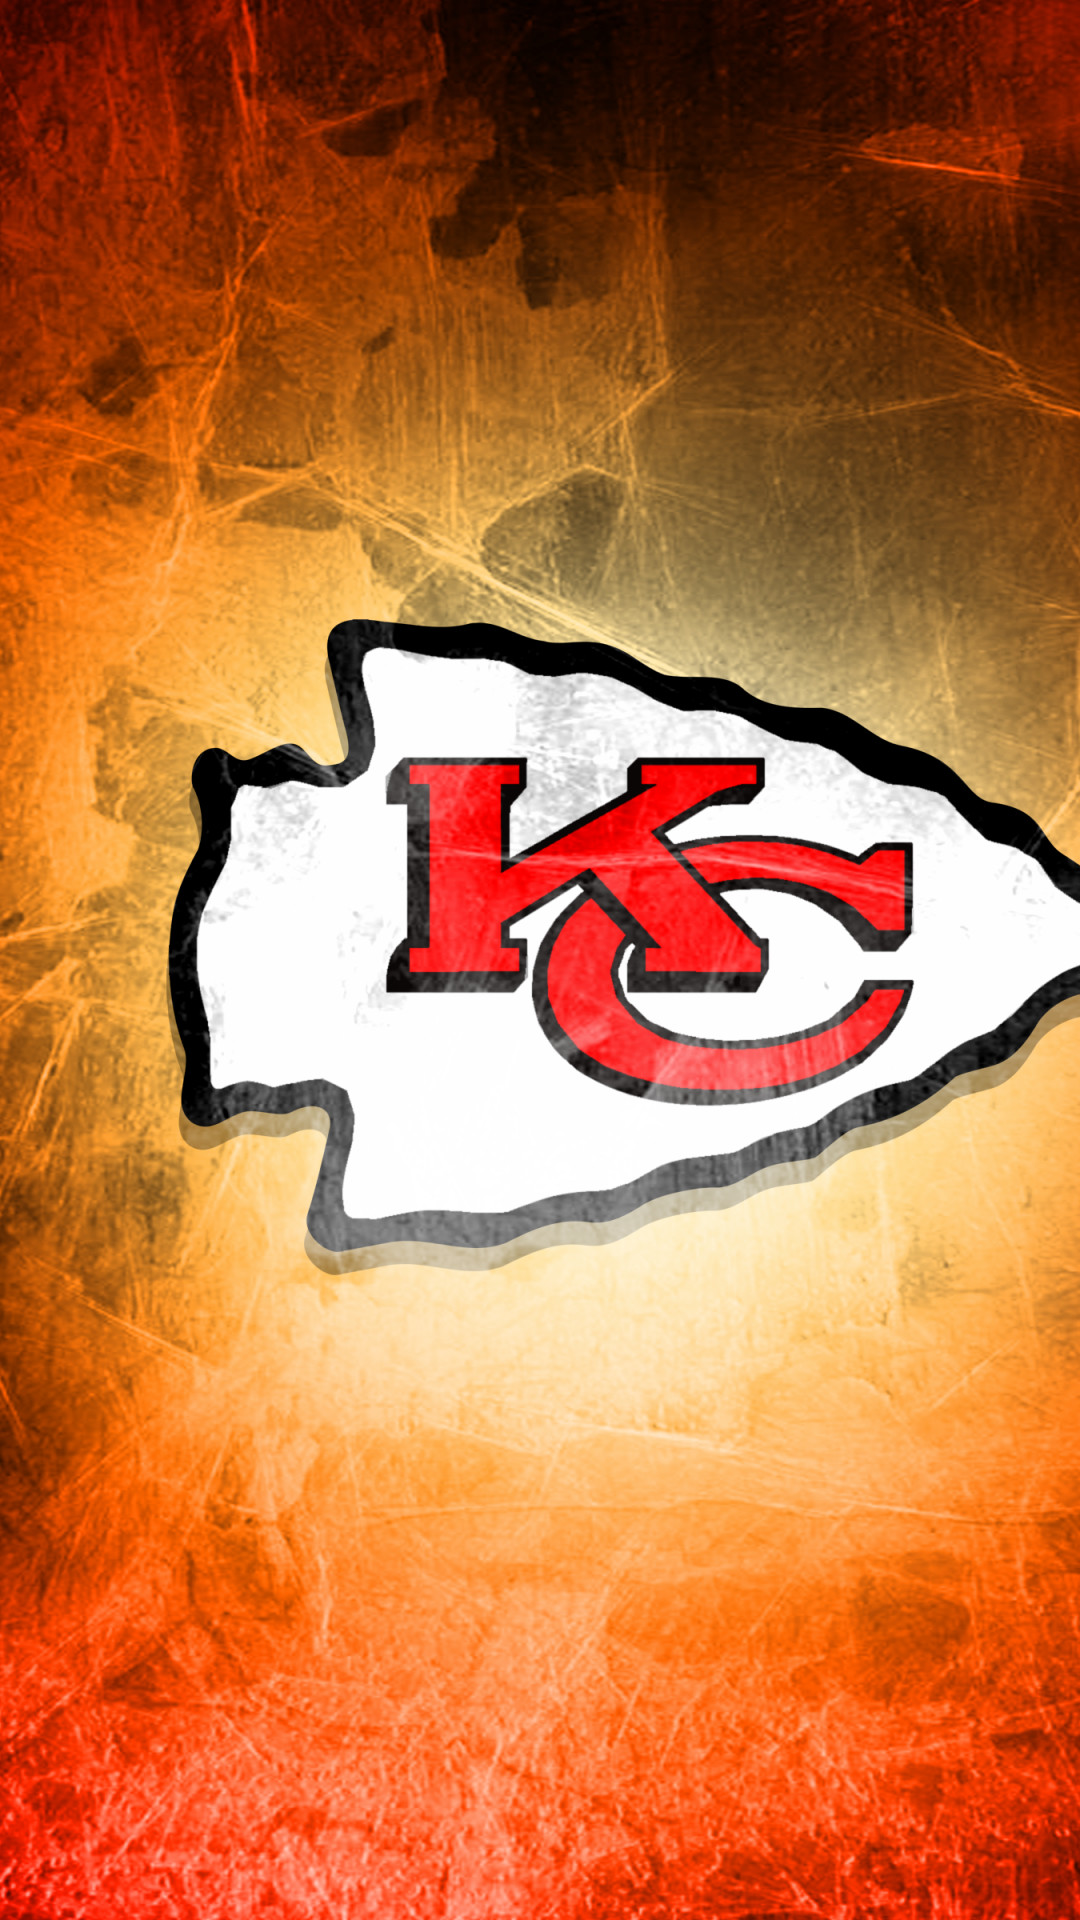 Kansas City Chiefs on Twitter Upgrade your wallpapers surface   WallpaperWednesday httpstcoX1X2UMS3pp  Twitter